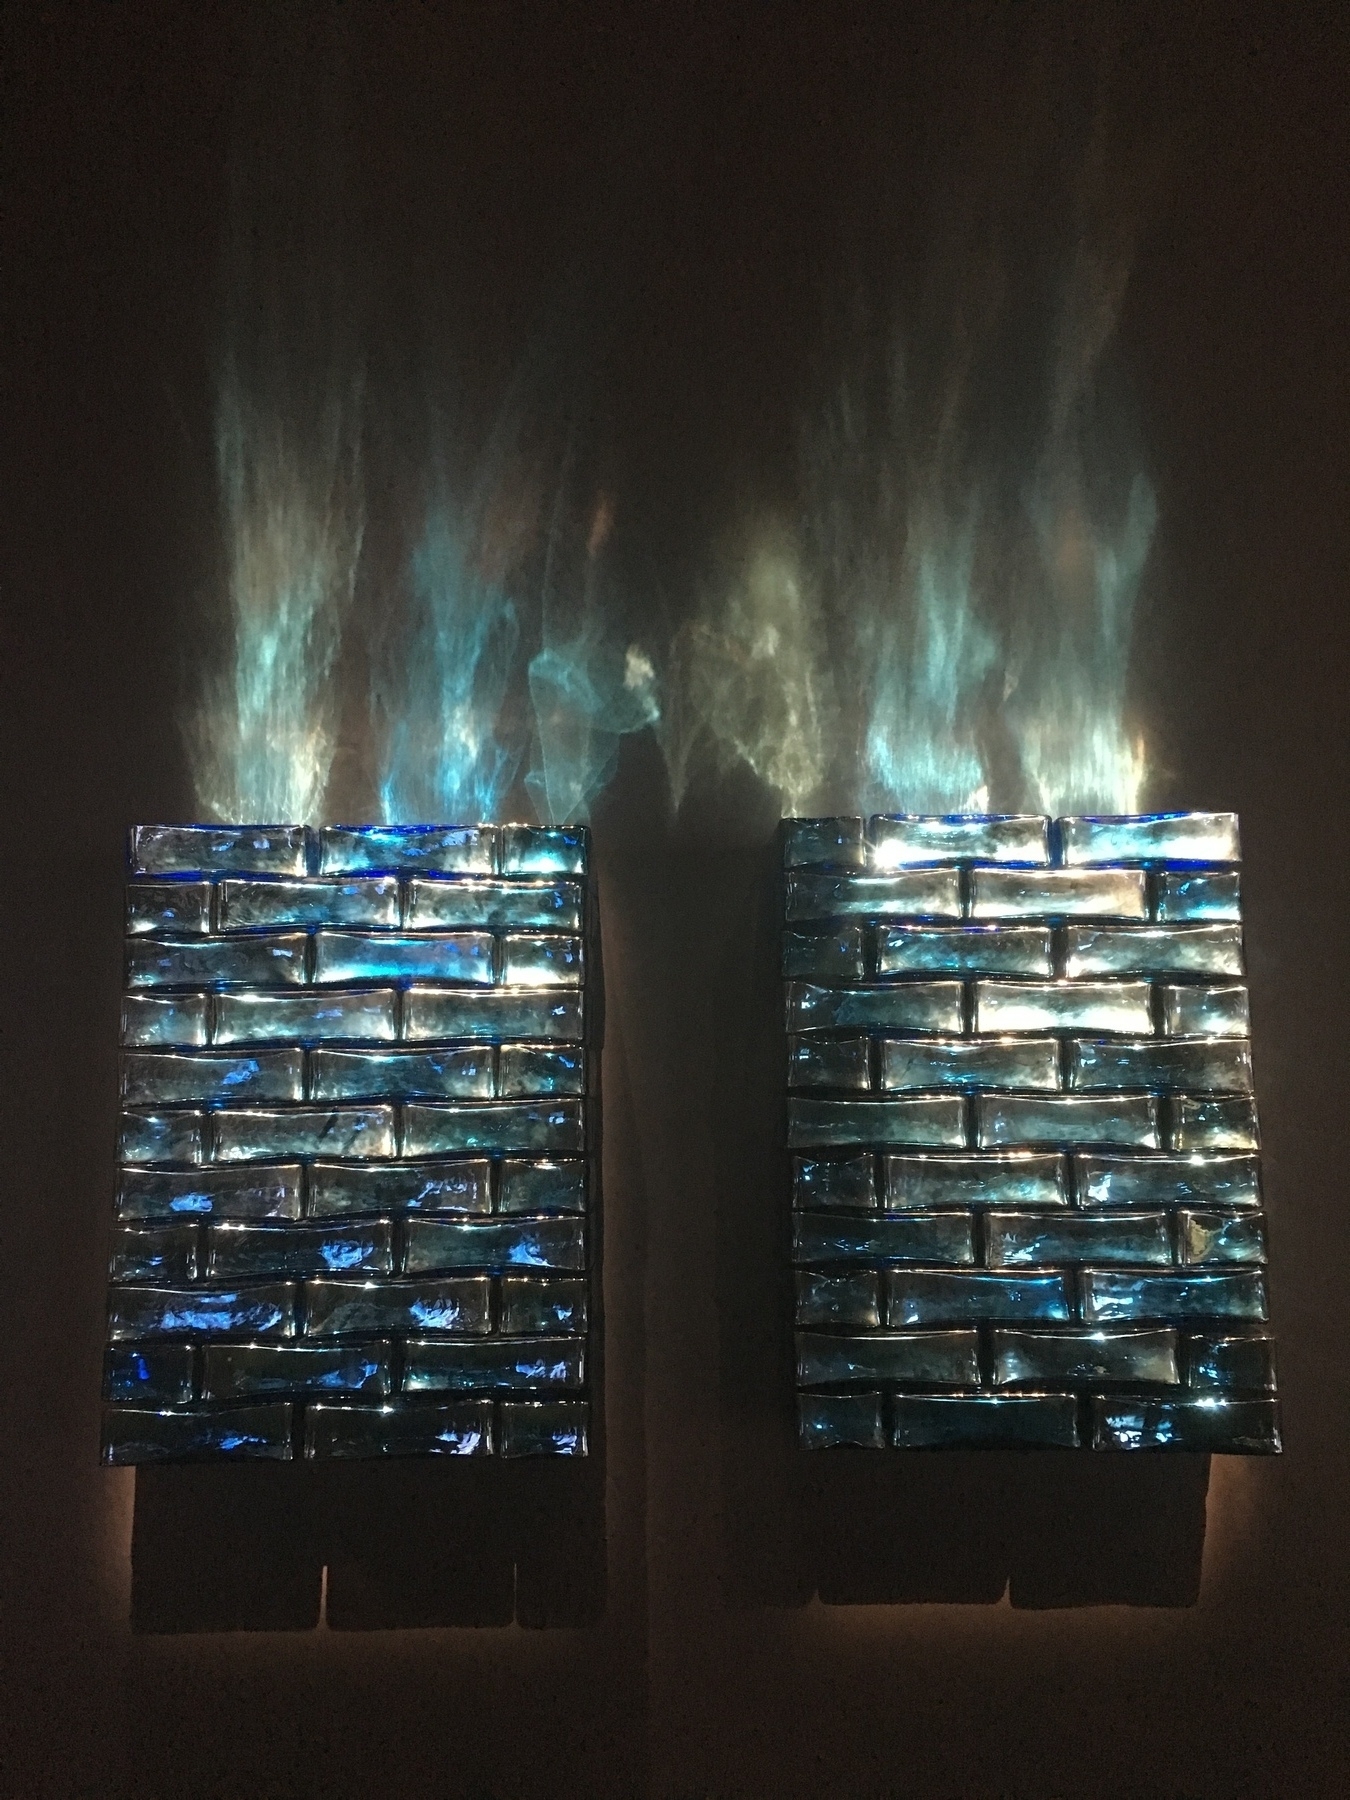 Two wall mounted rectangular objects made of glass blocks in various shades of blue with dispersed lights projected upwards from the top of them.